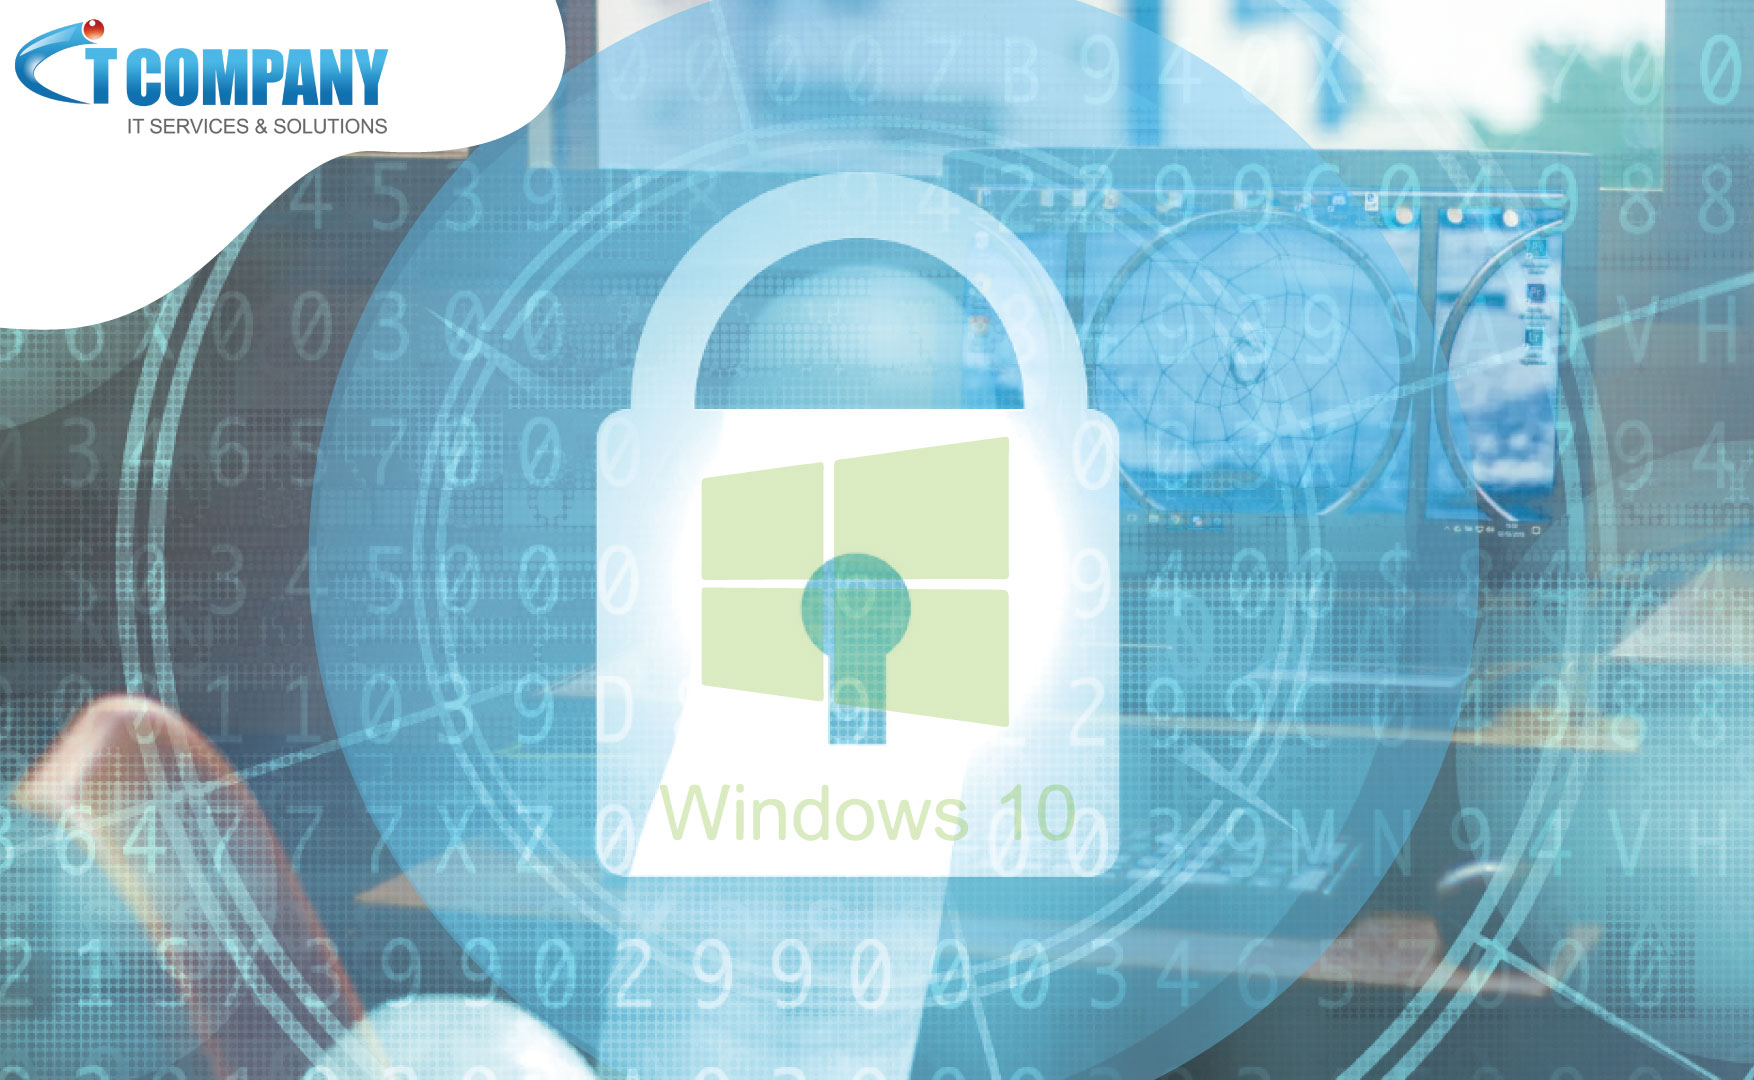 Now is the time to update your Windows PC to address the serious PrintNightmare security vulnerability